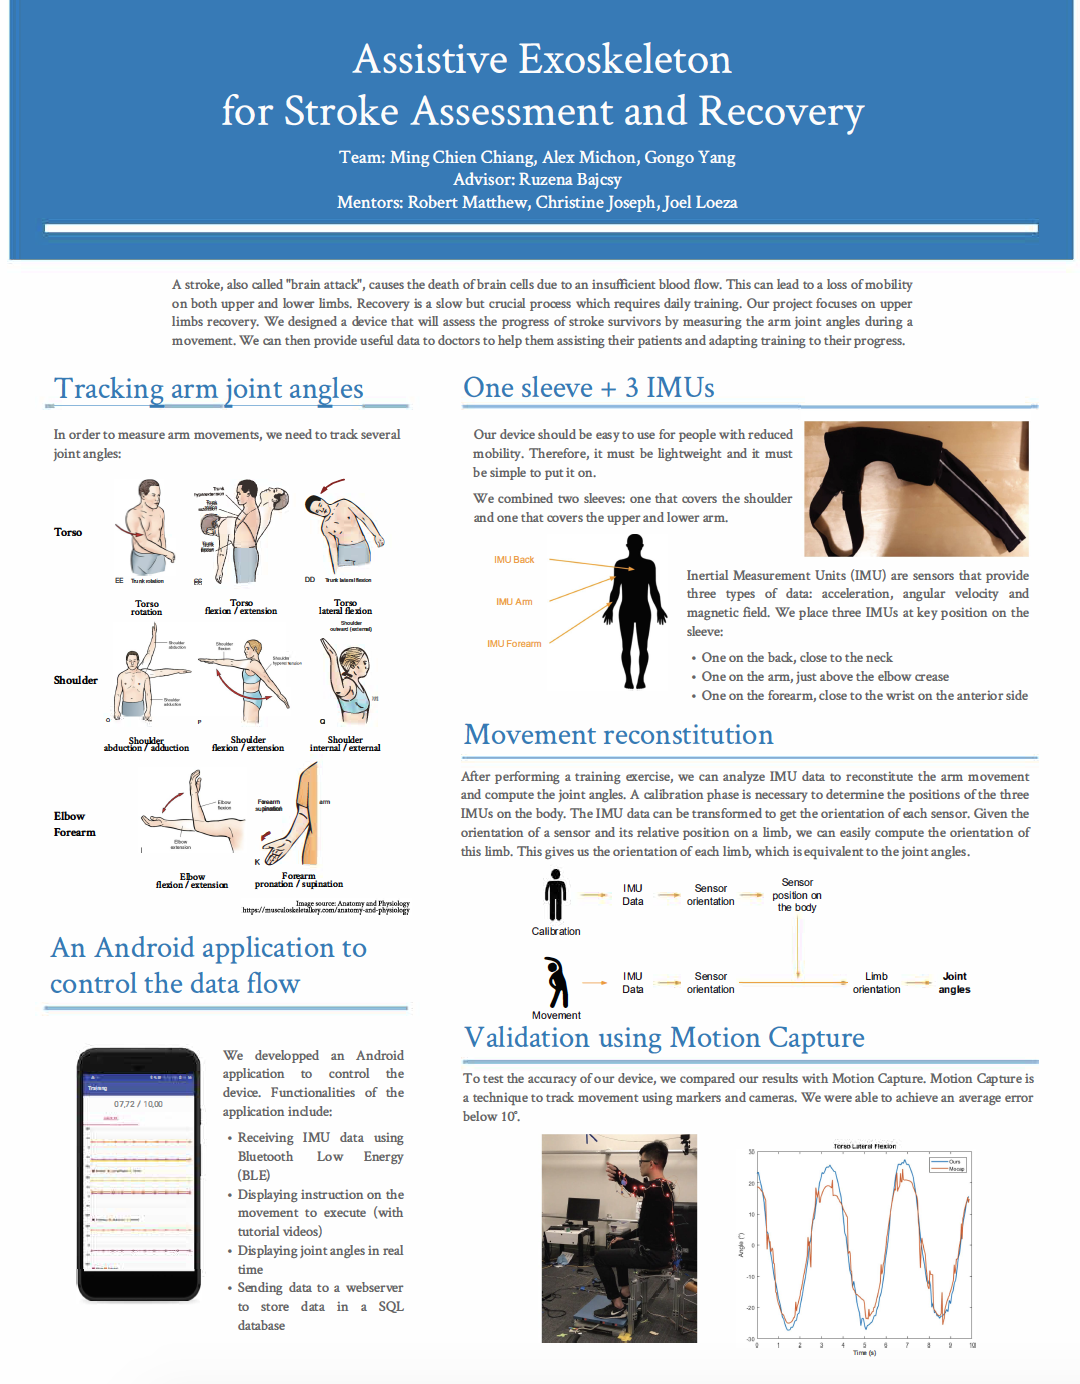 Assistive Exoskeleton for Stroke Assessment and Recovery Project Brief